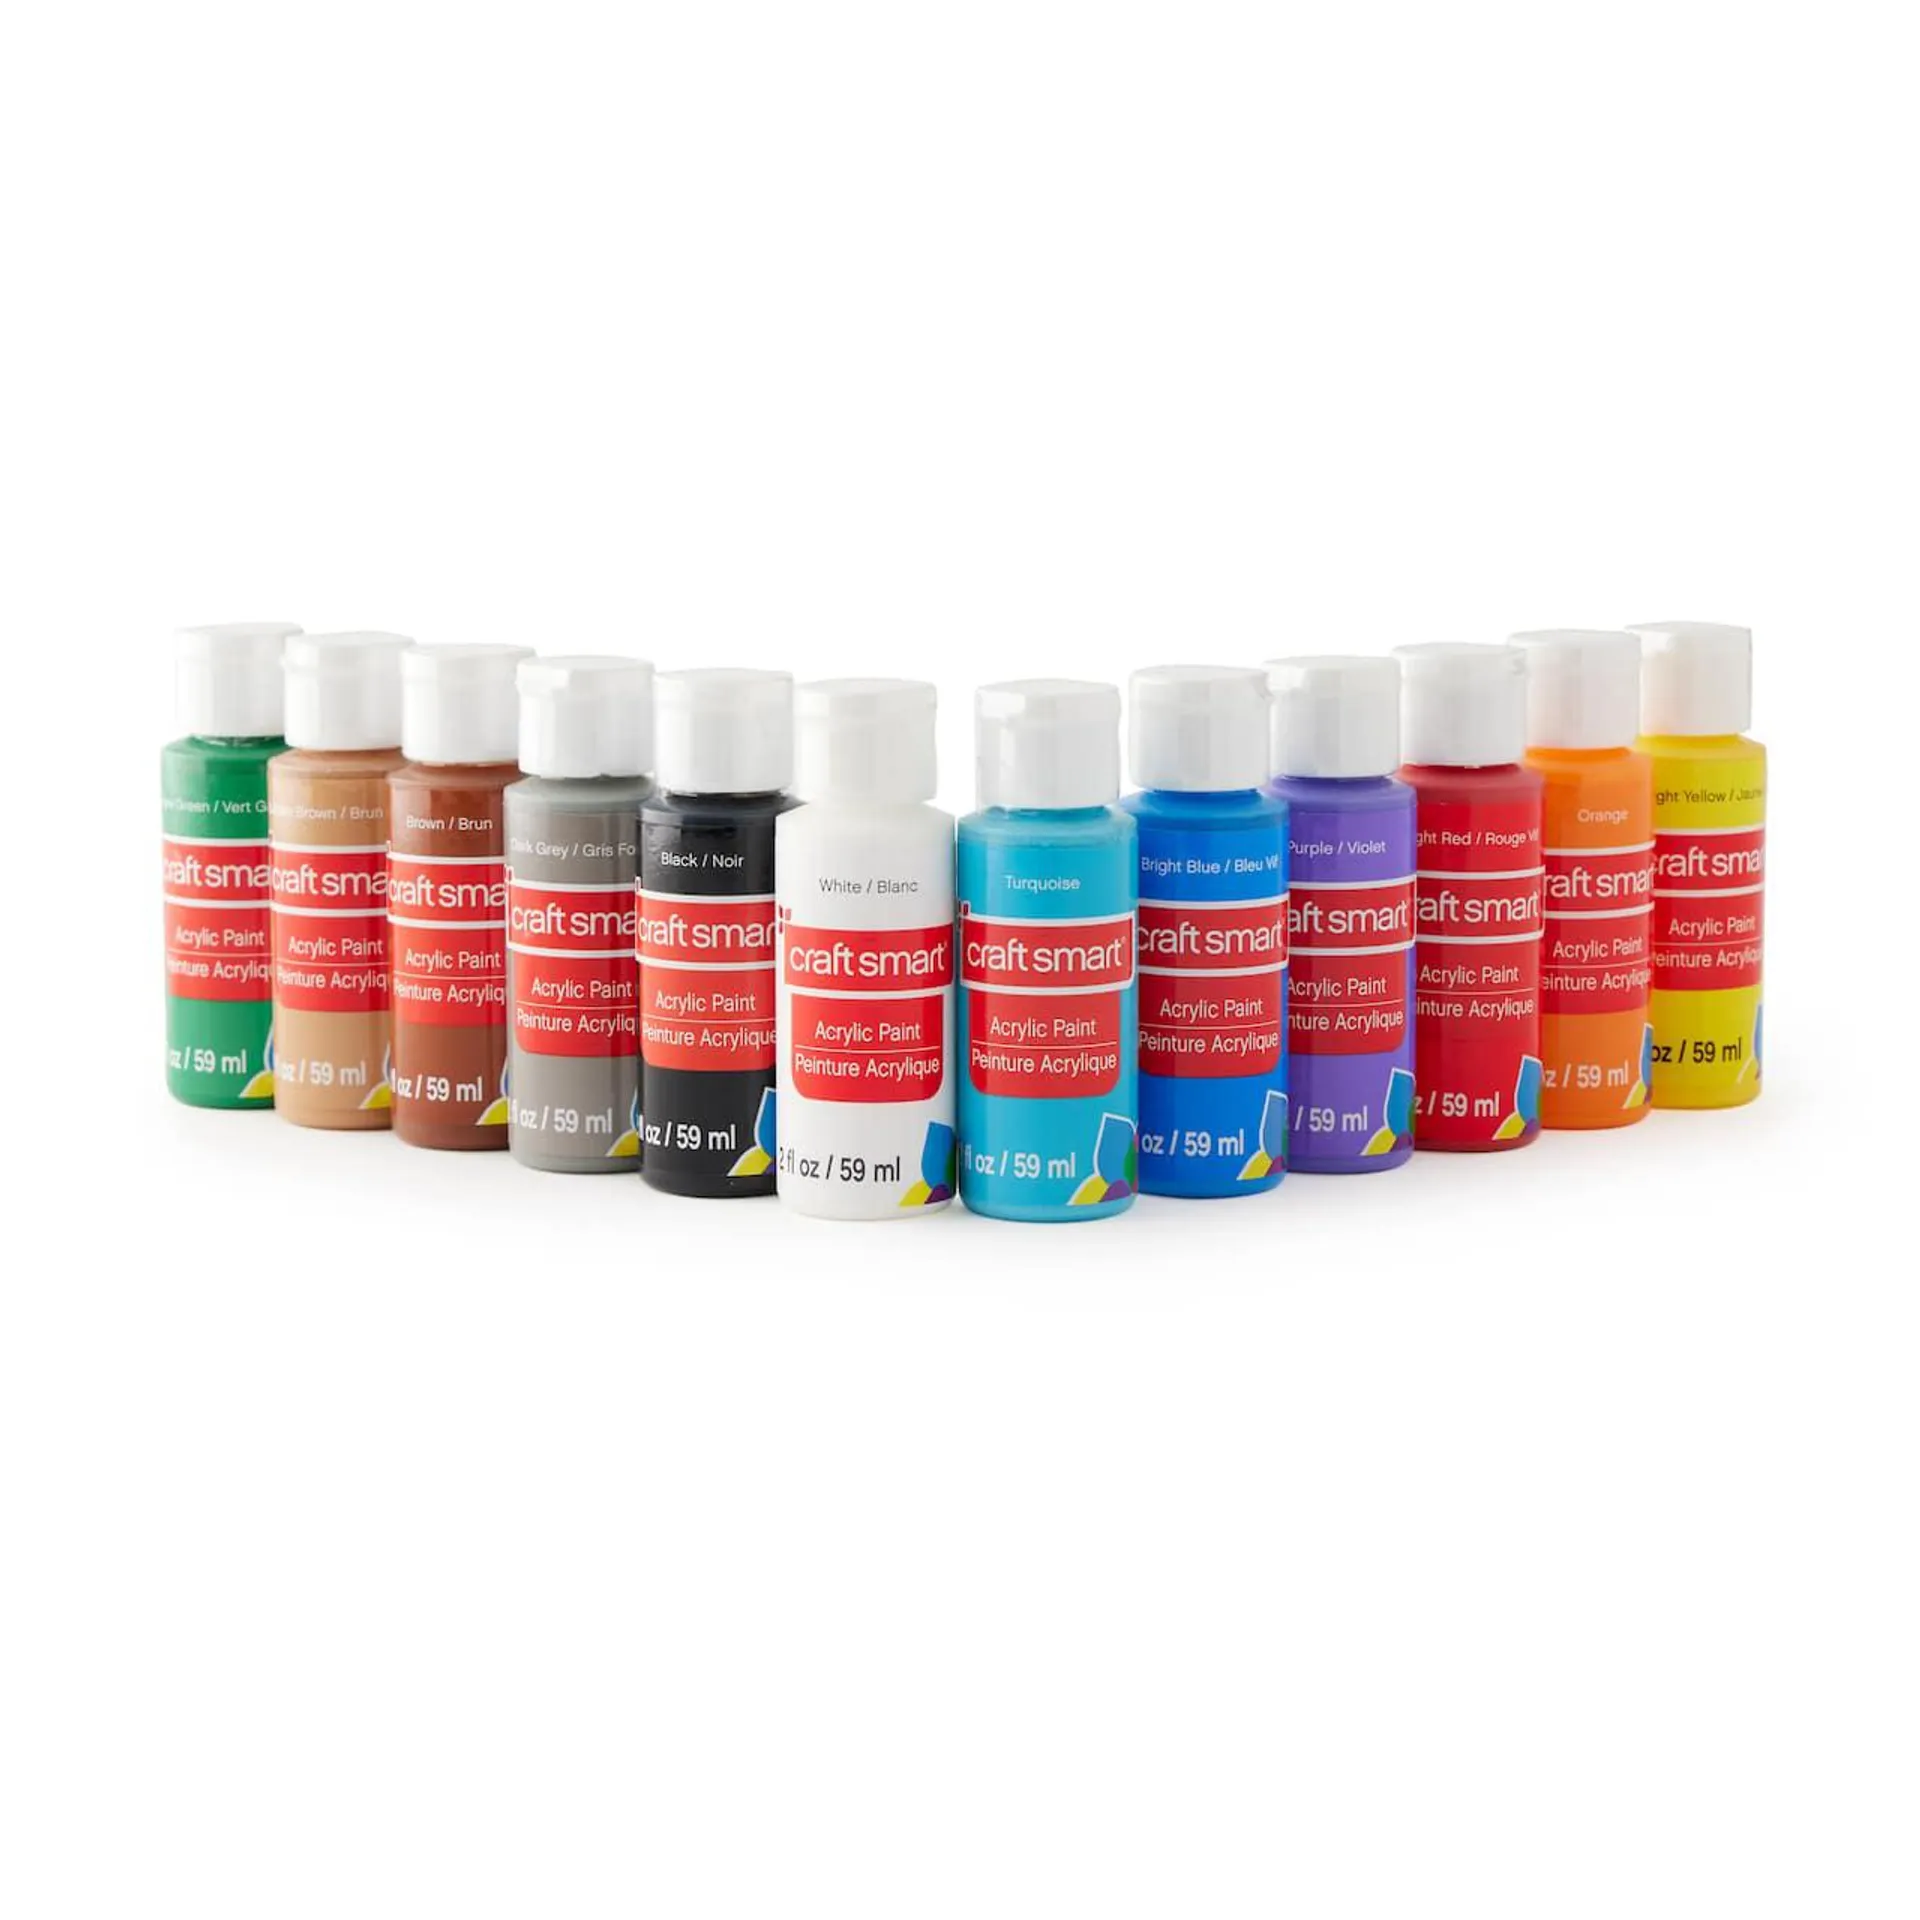 12 Packs: 12 ct. (144 total) Acrylic Paint Value Pack by Craft Smart®